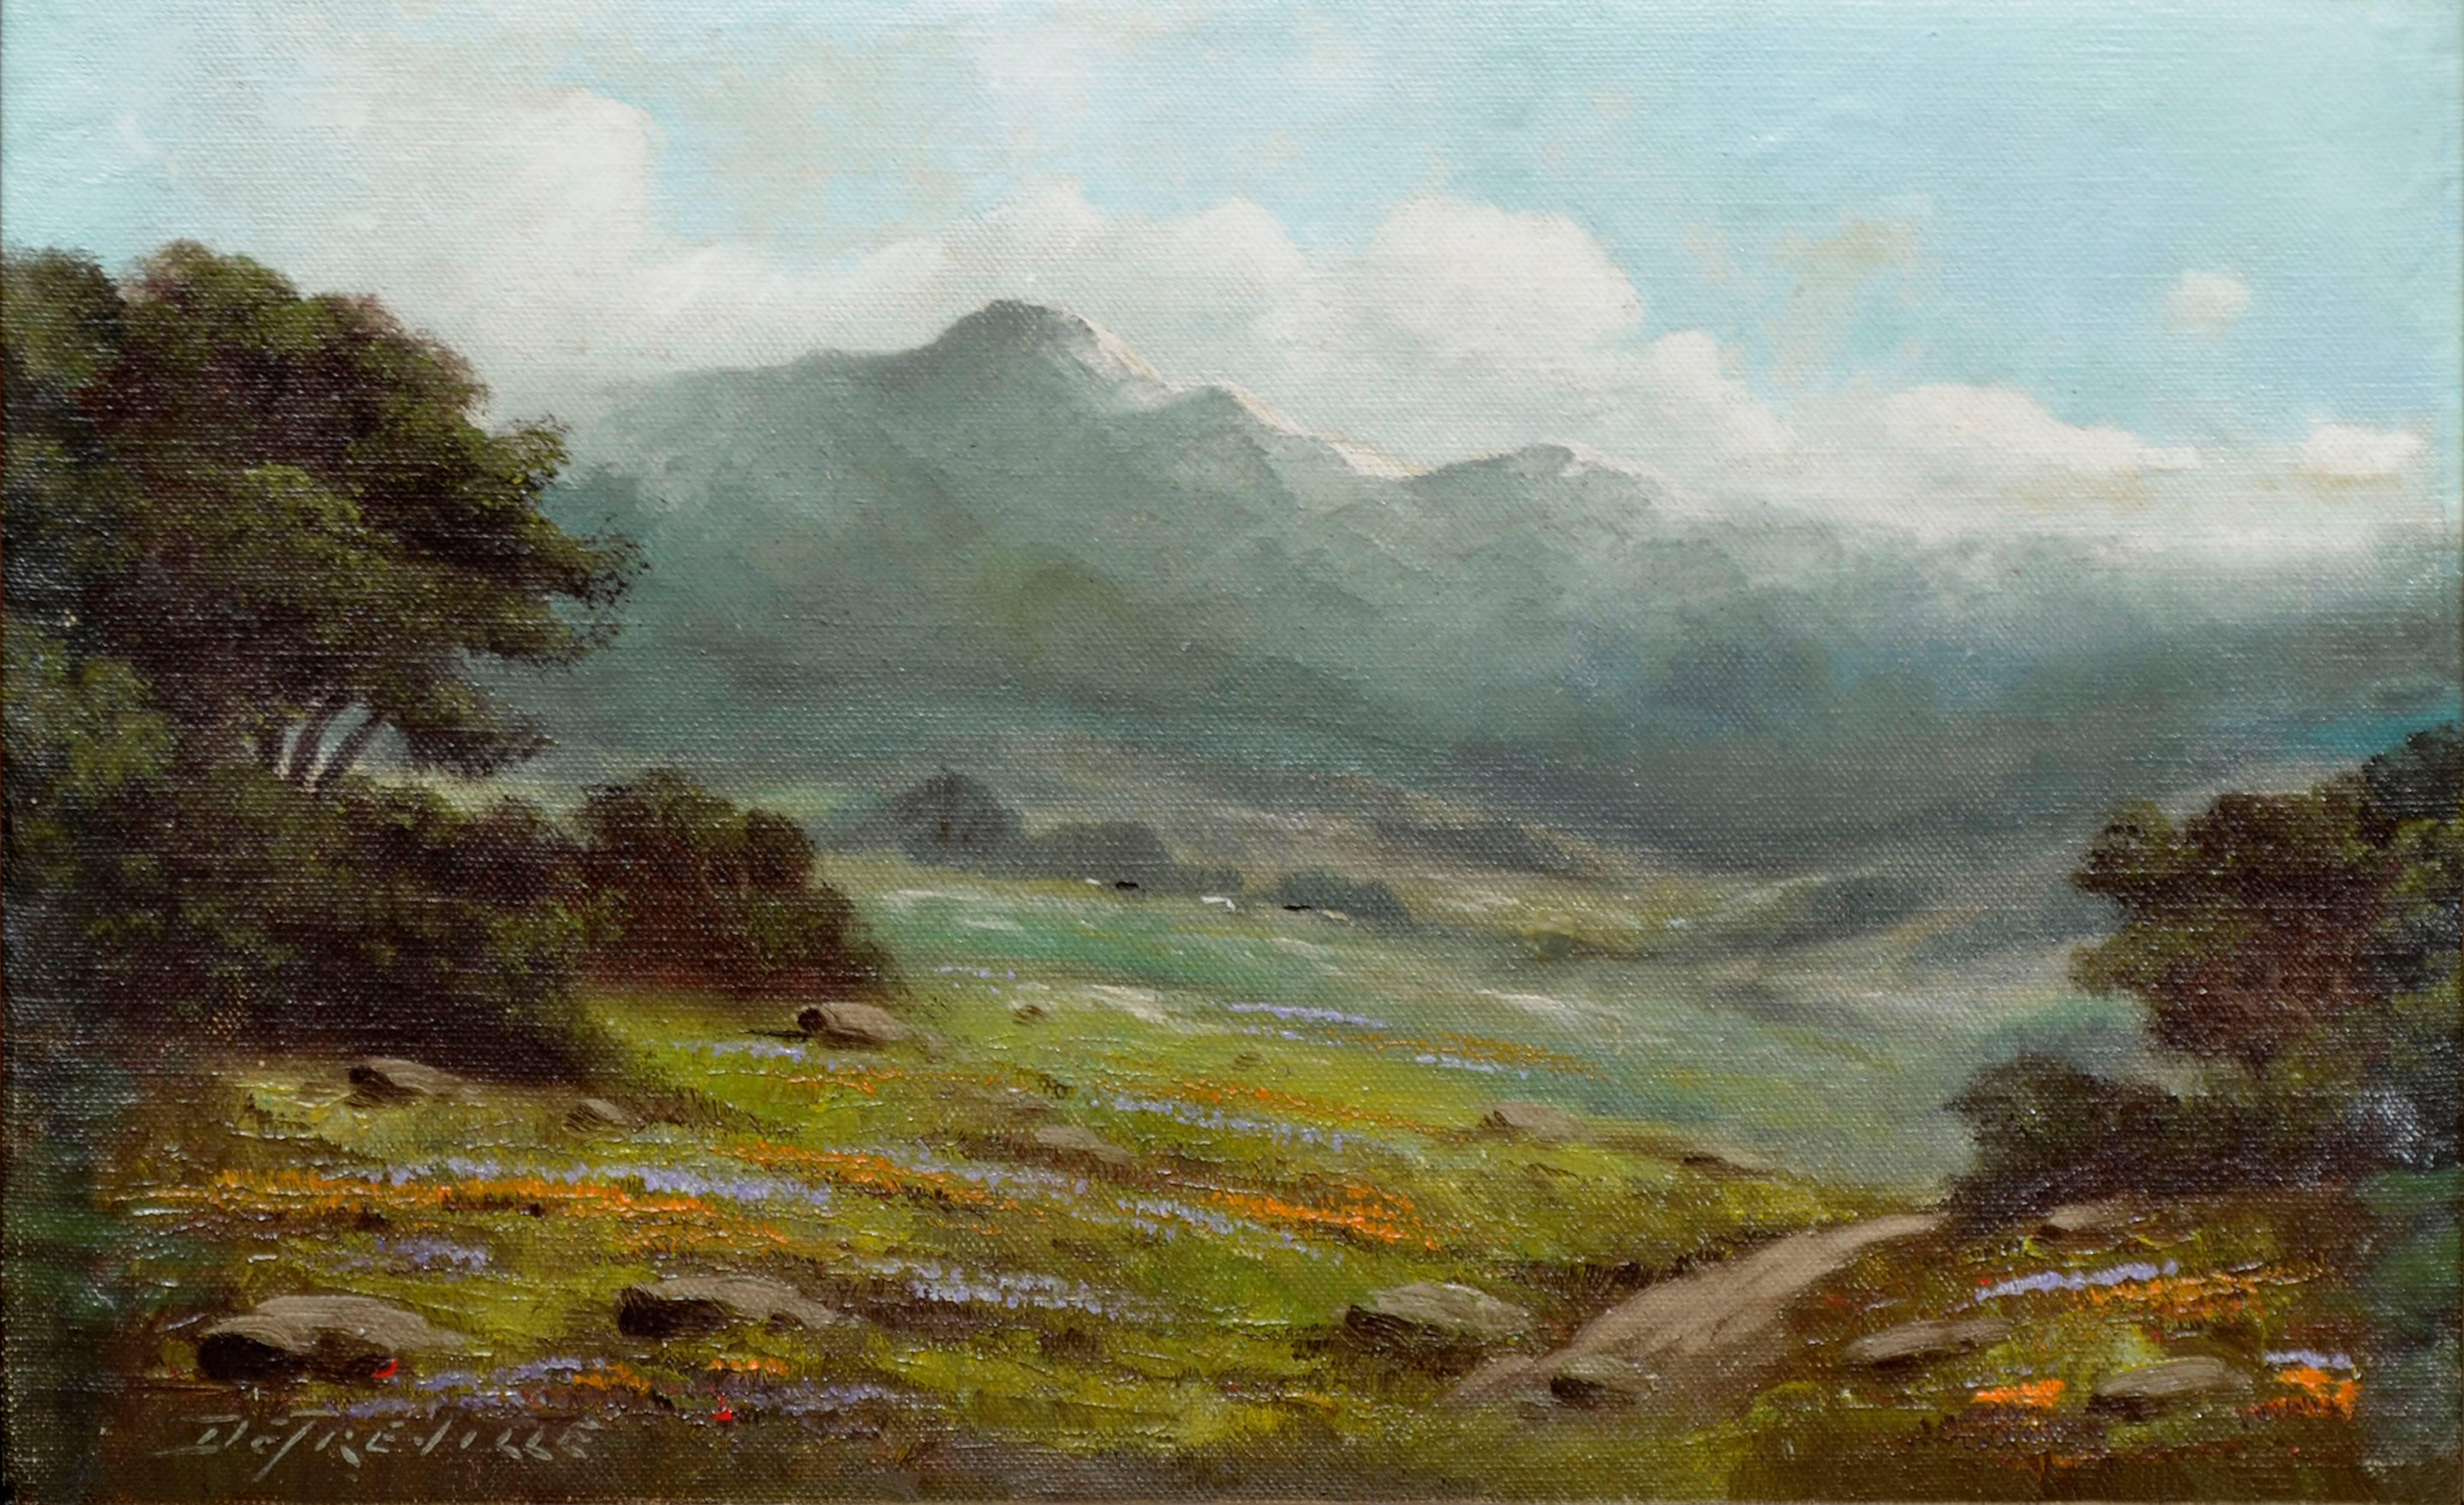 Mount Tamalpais with Lupines and Poppies - Painting by Richard DeTreville